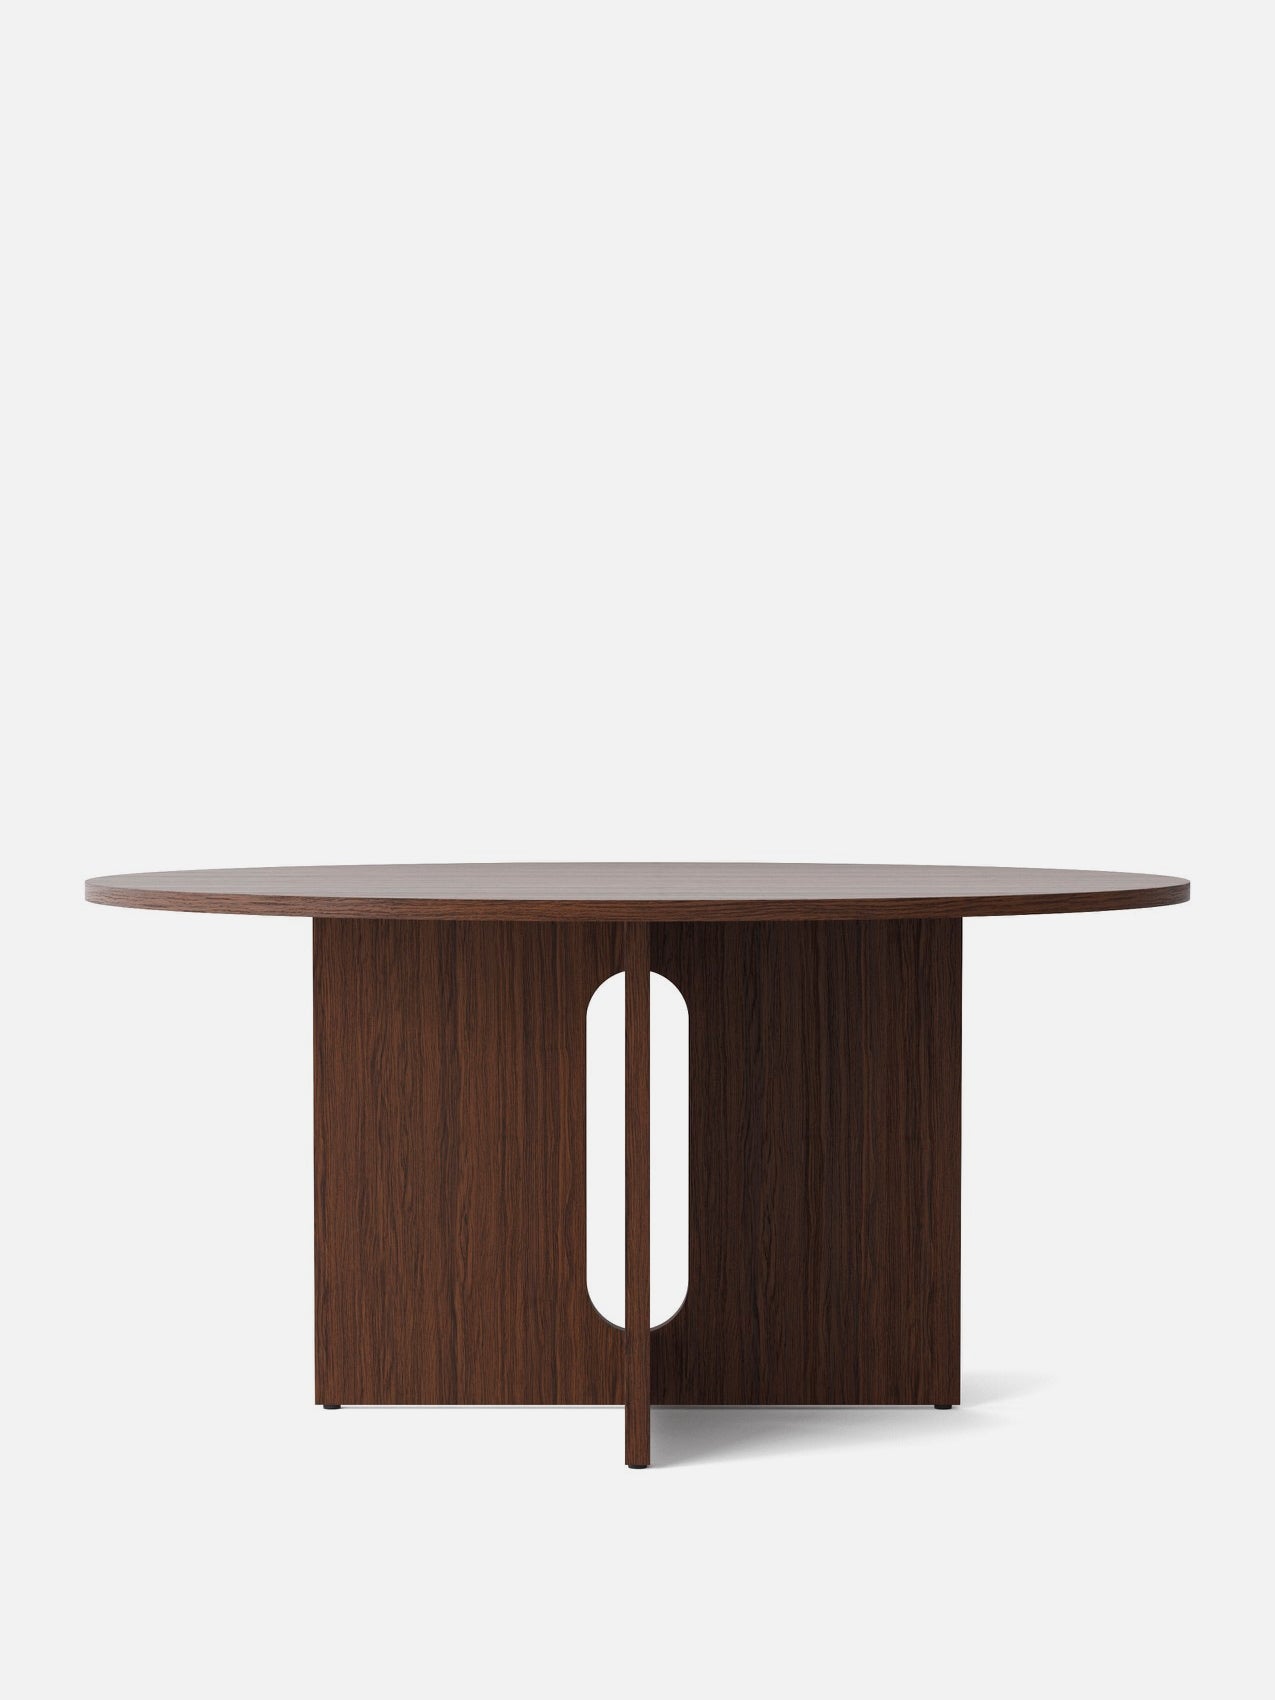 Androgyne Dining Table-Dining Table-Danielle Siggerud-Dining Height (59in)/Dark Stained Oak-Round - Dark Stained Oak-menu-minimalist-modern-danish-design-home-decor